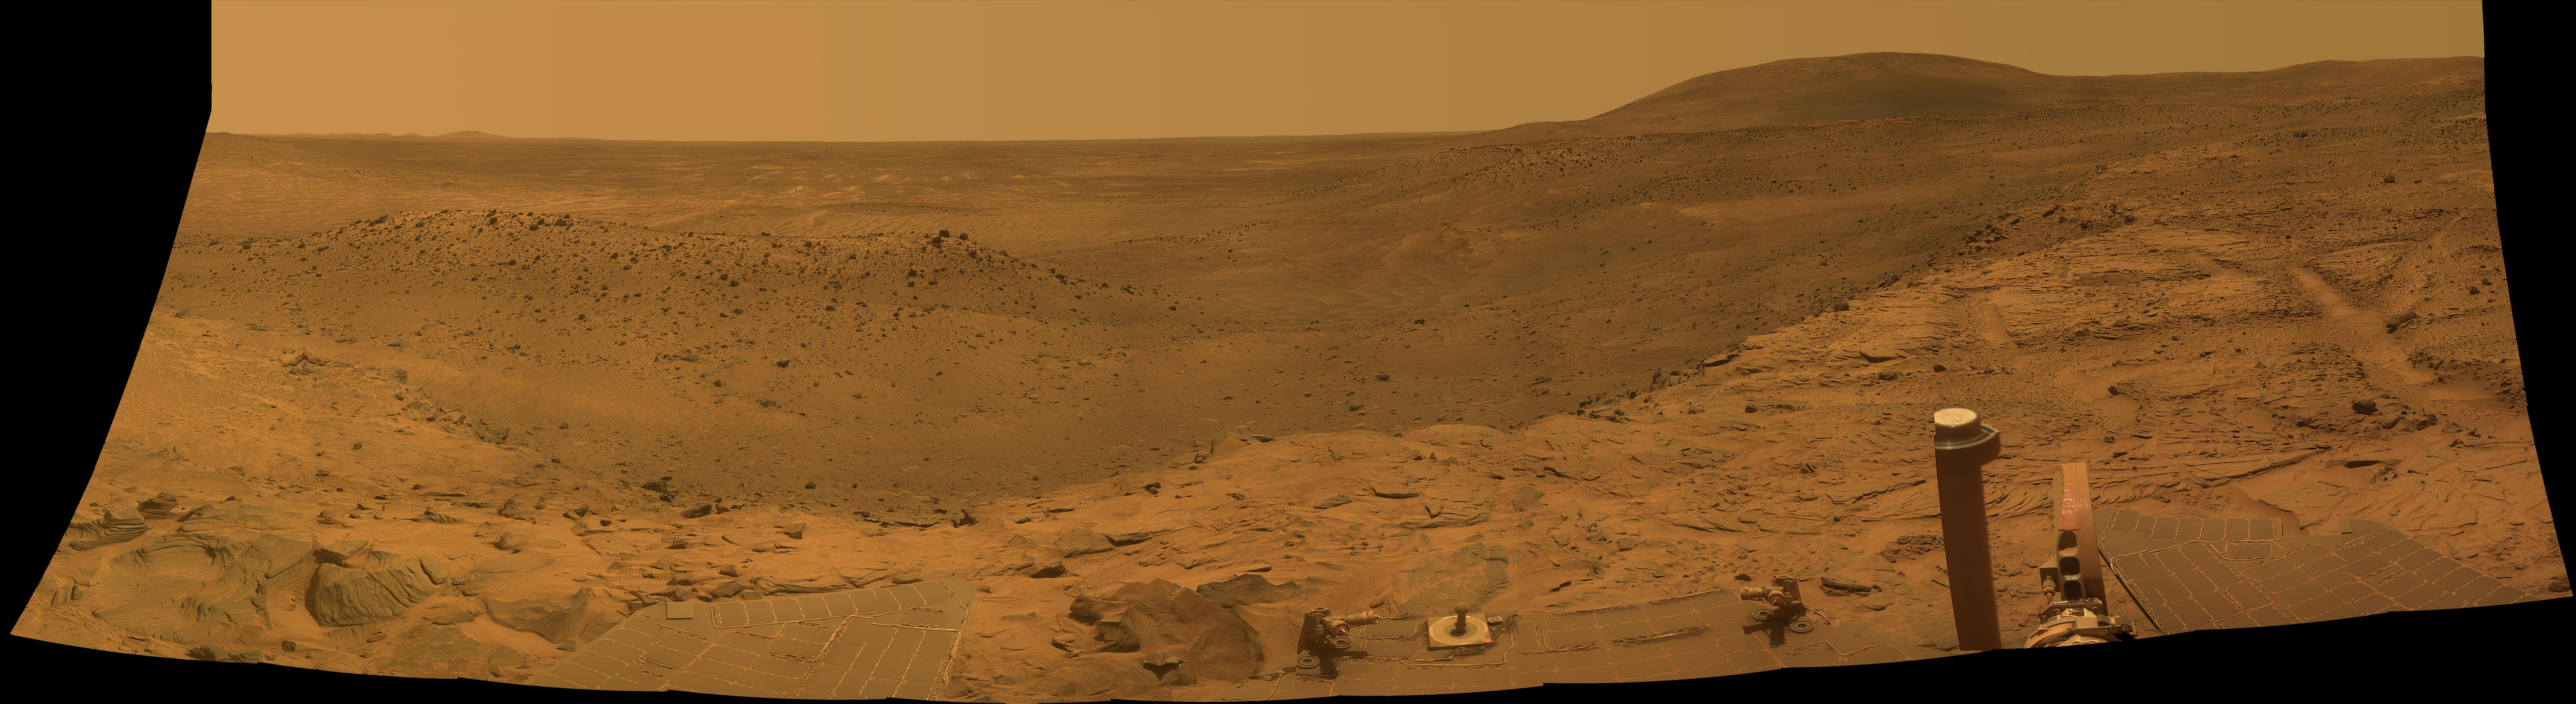 West Valley Panorama from the Spirit Rover on Mars